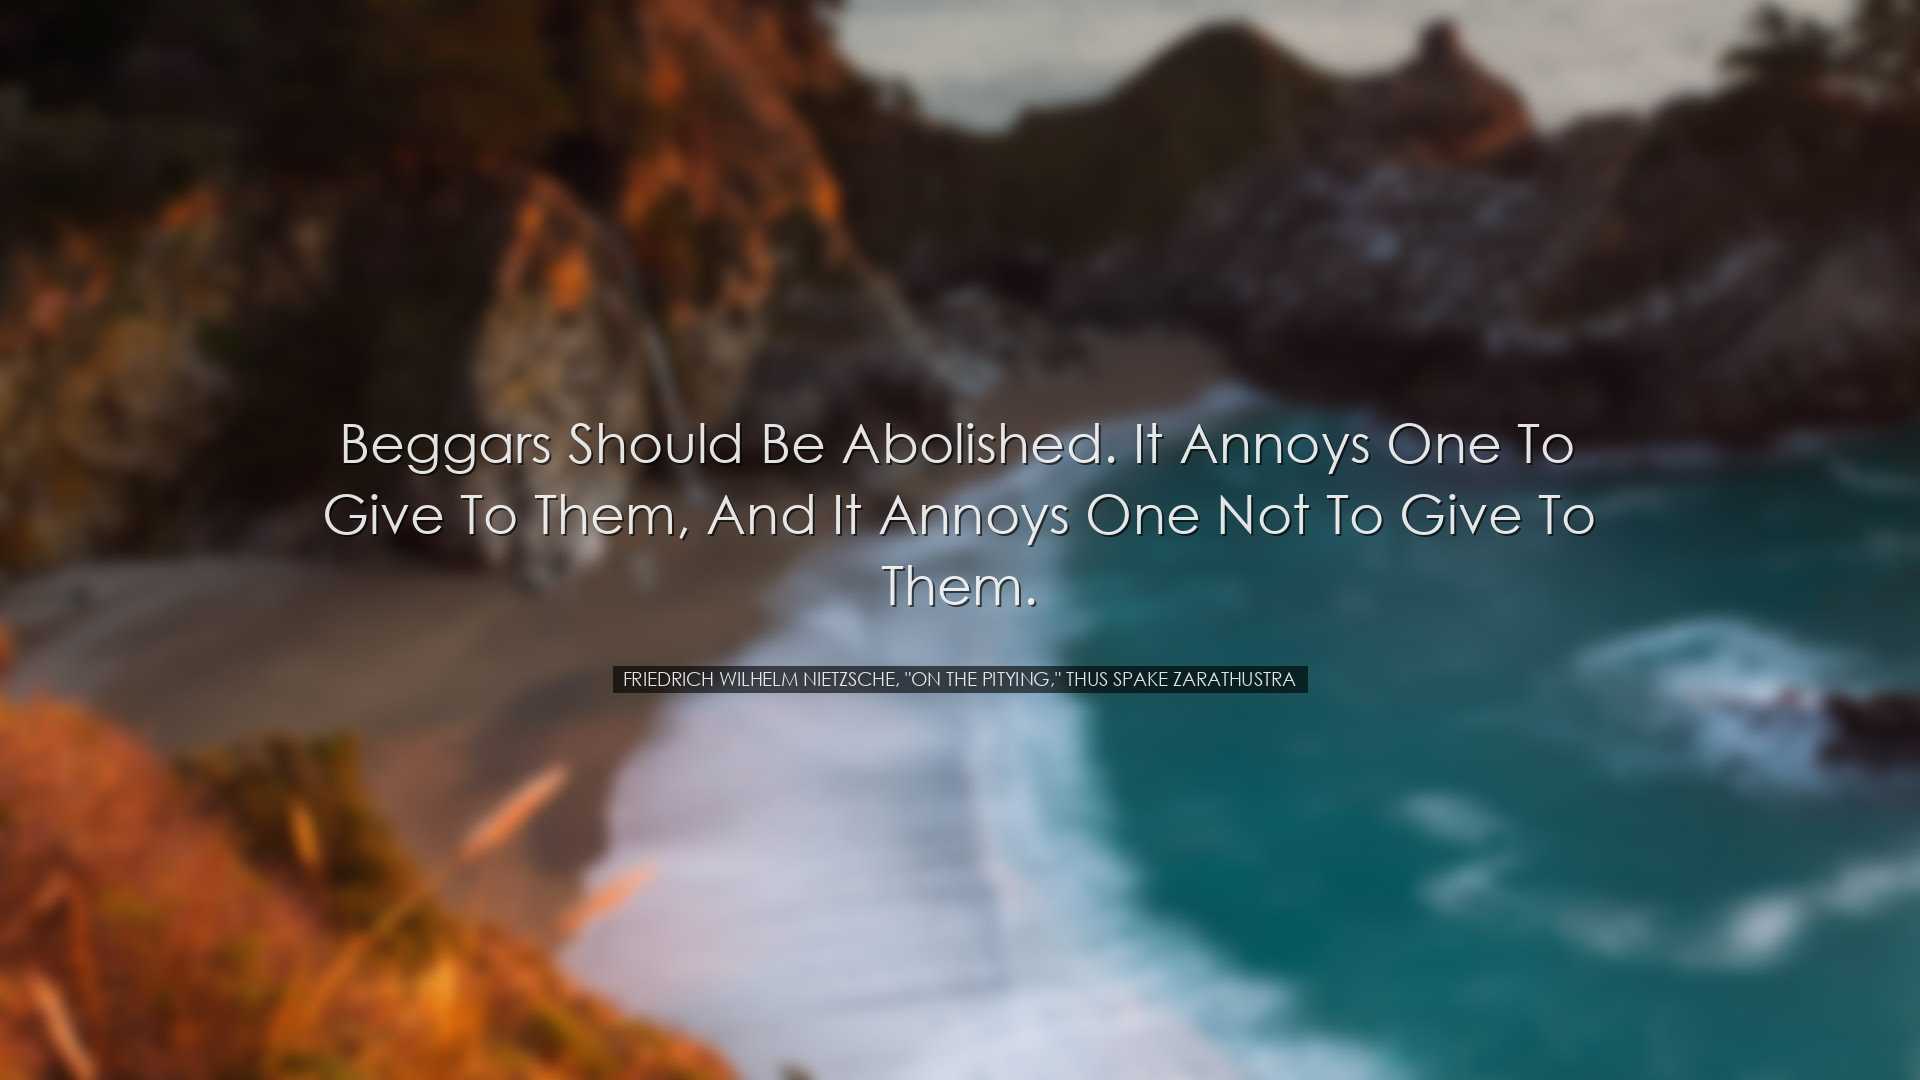 Beggars should be abolished. It annoys one to give to them, and it